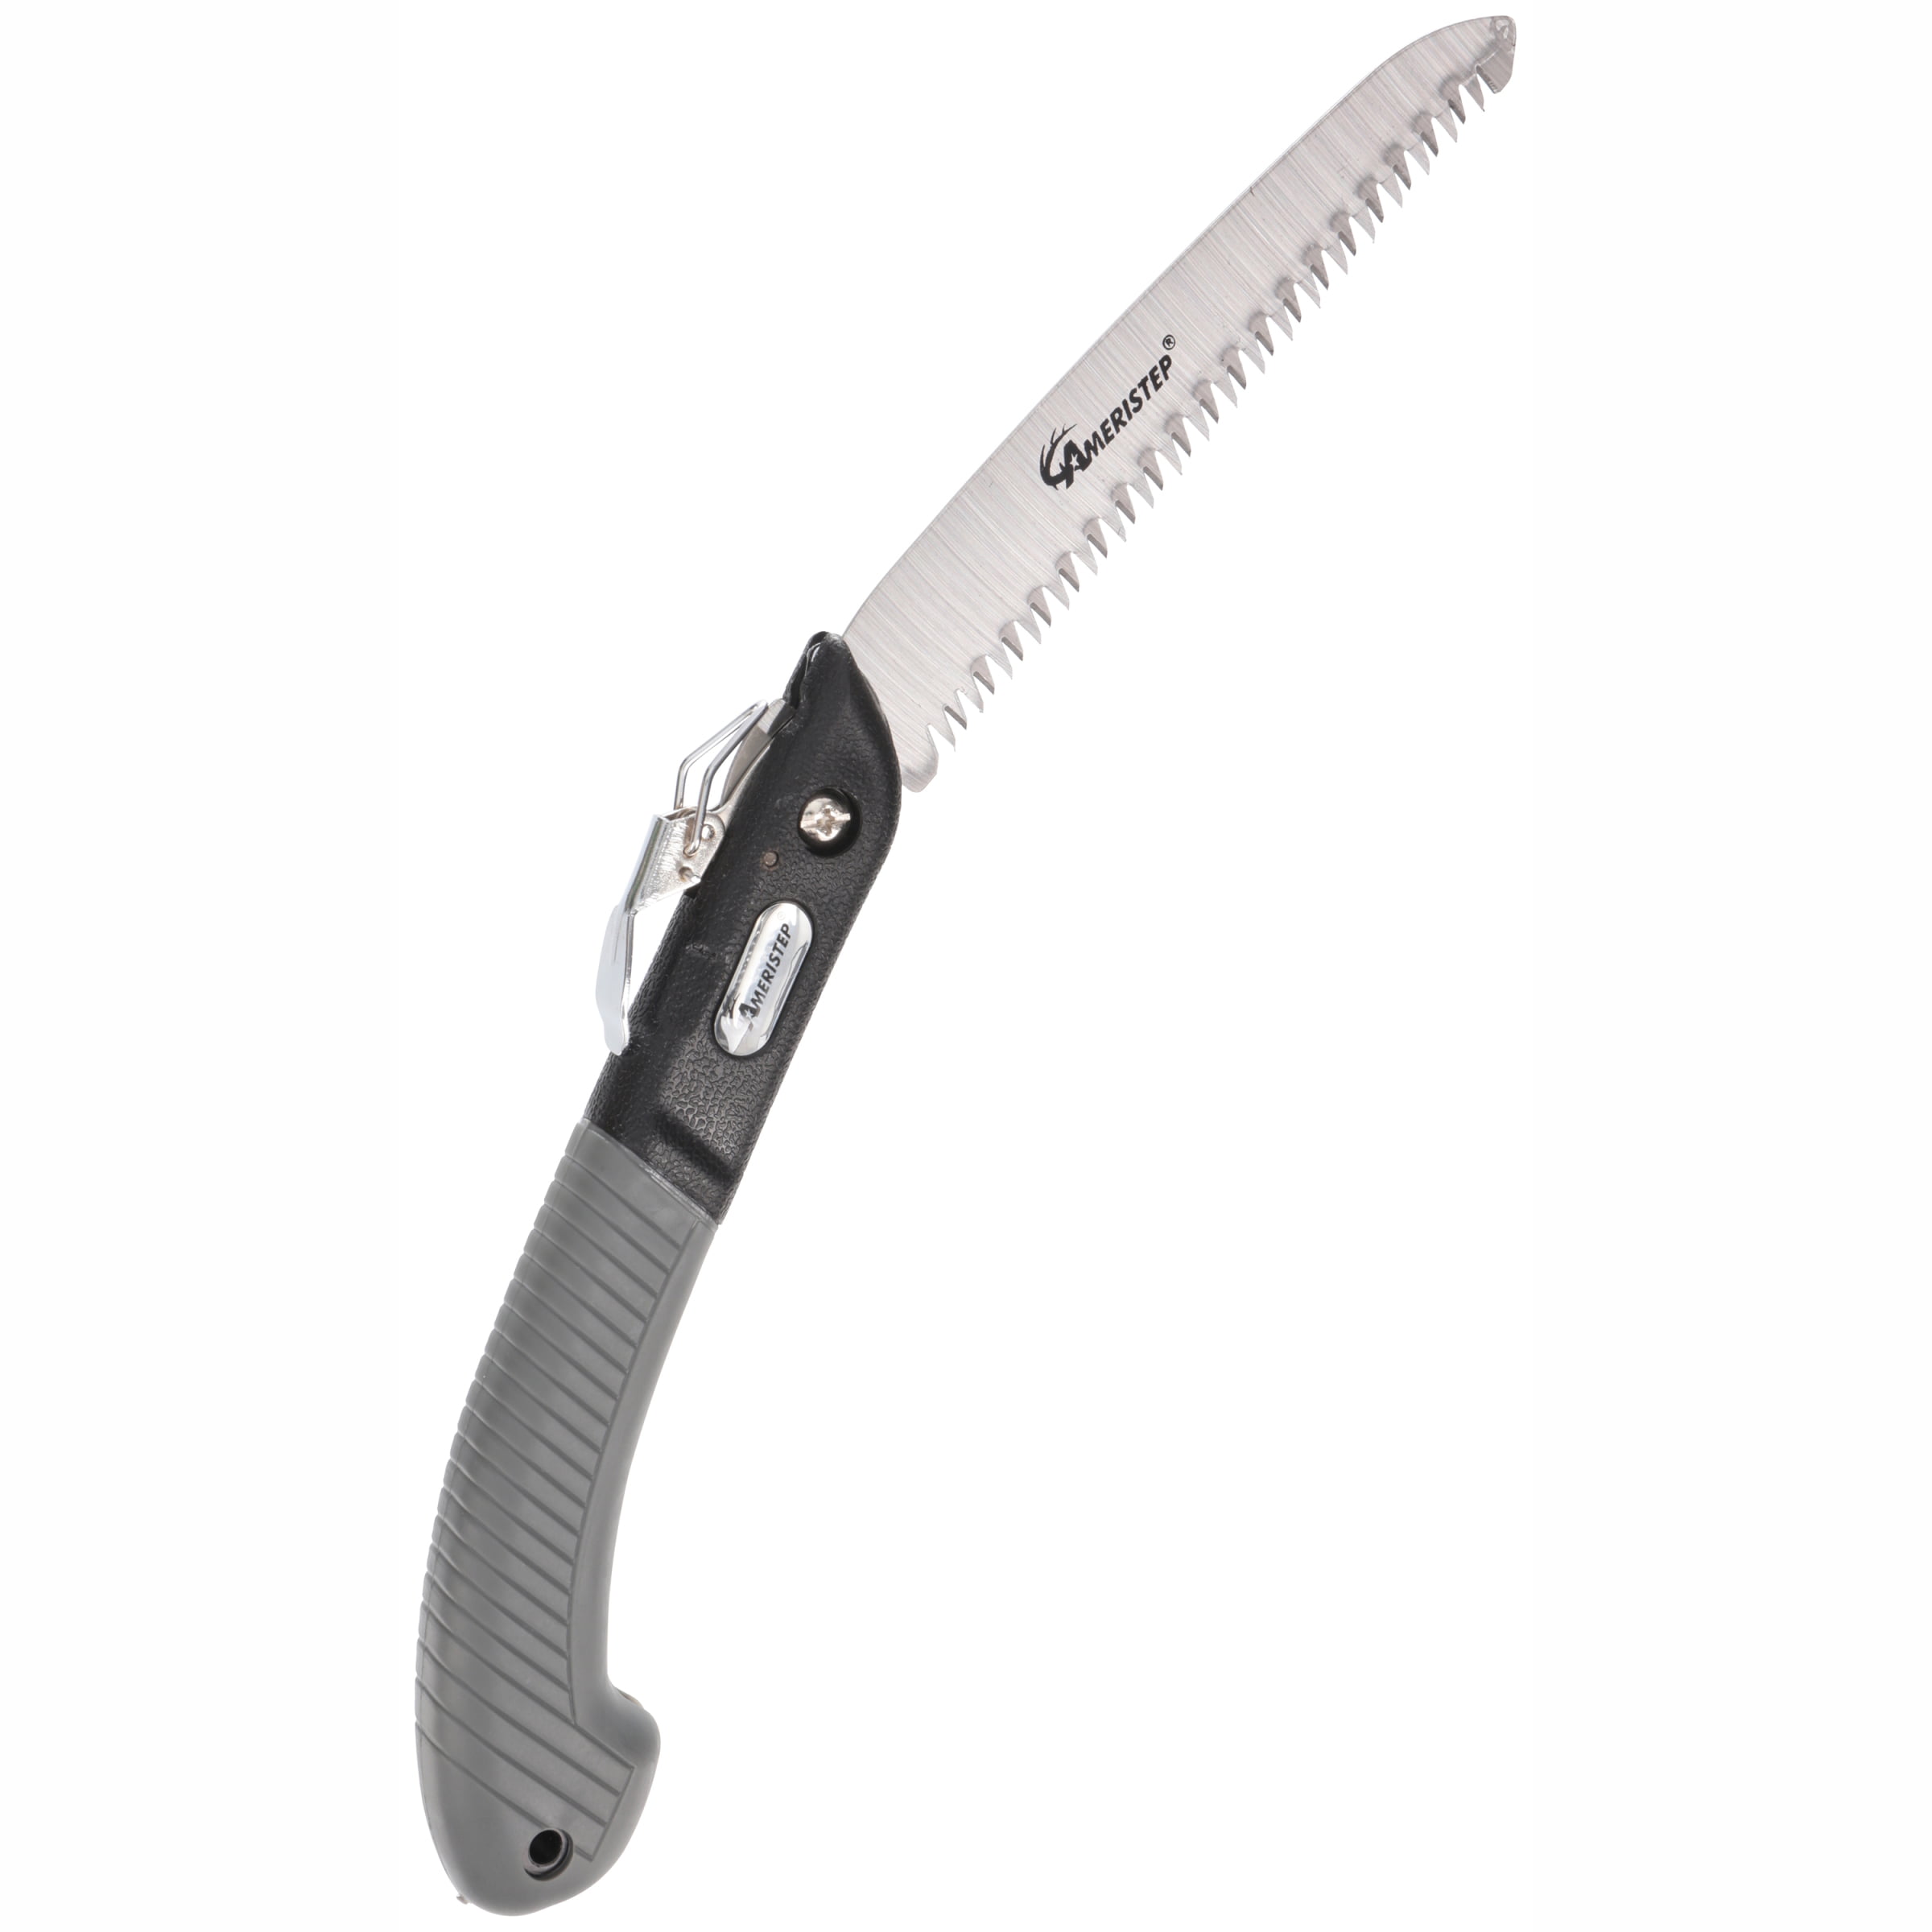 Compact Folding Saw Camping Hiking Backpacking Accessory Removable Blade Black 